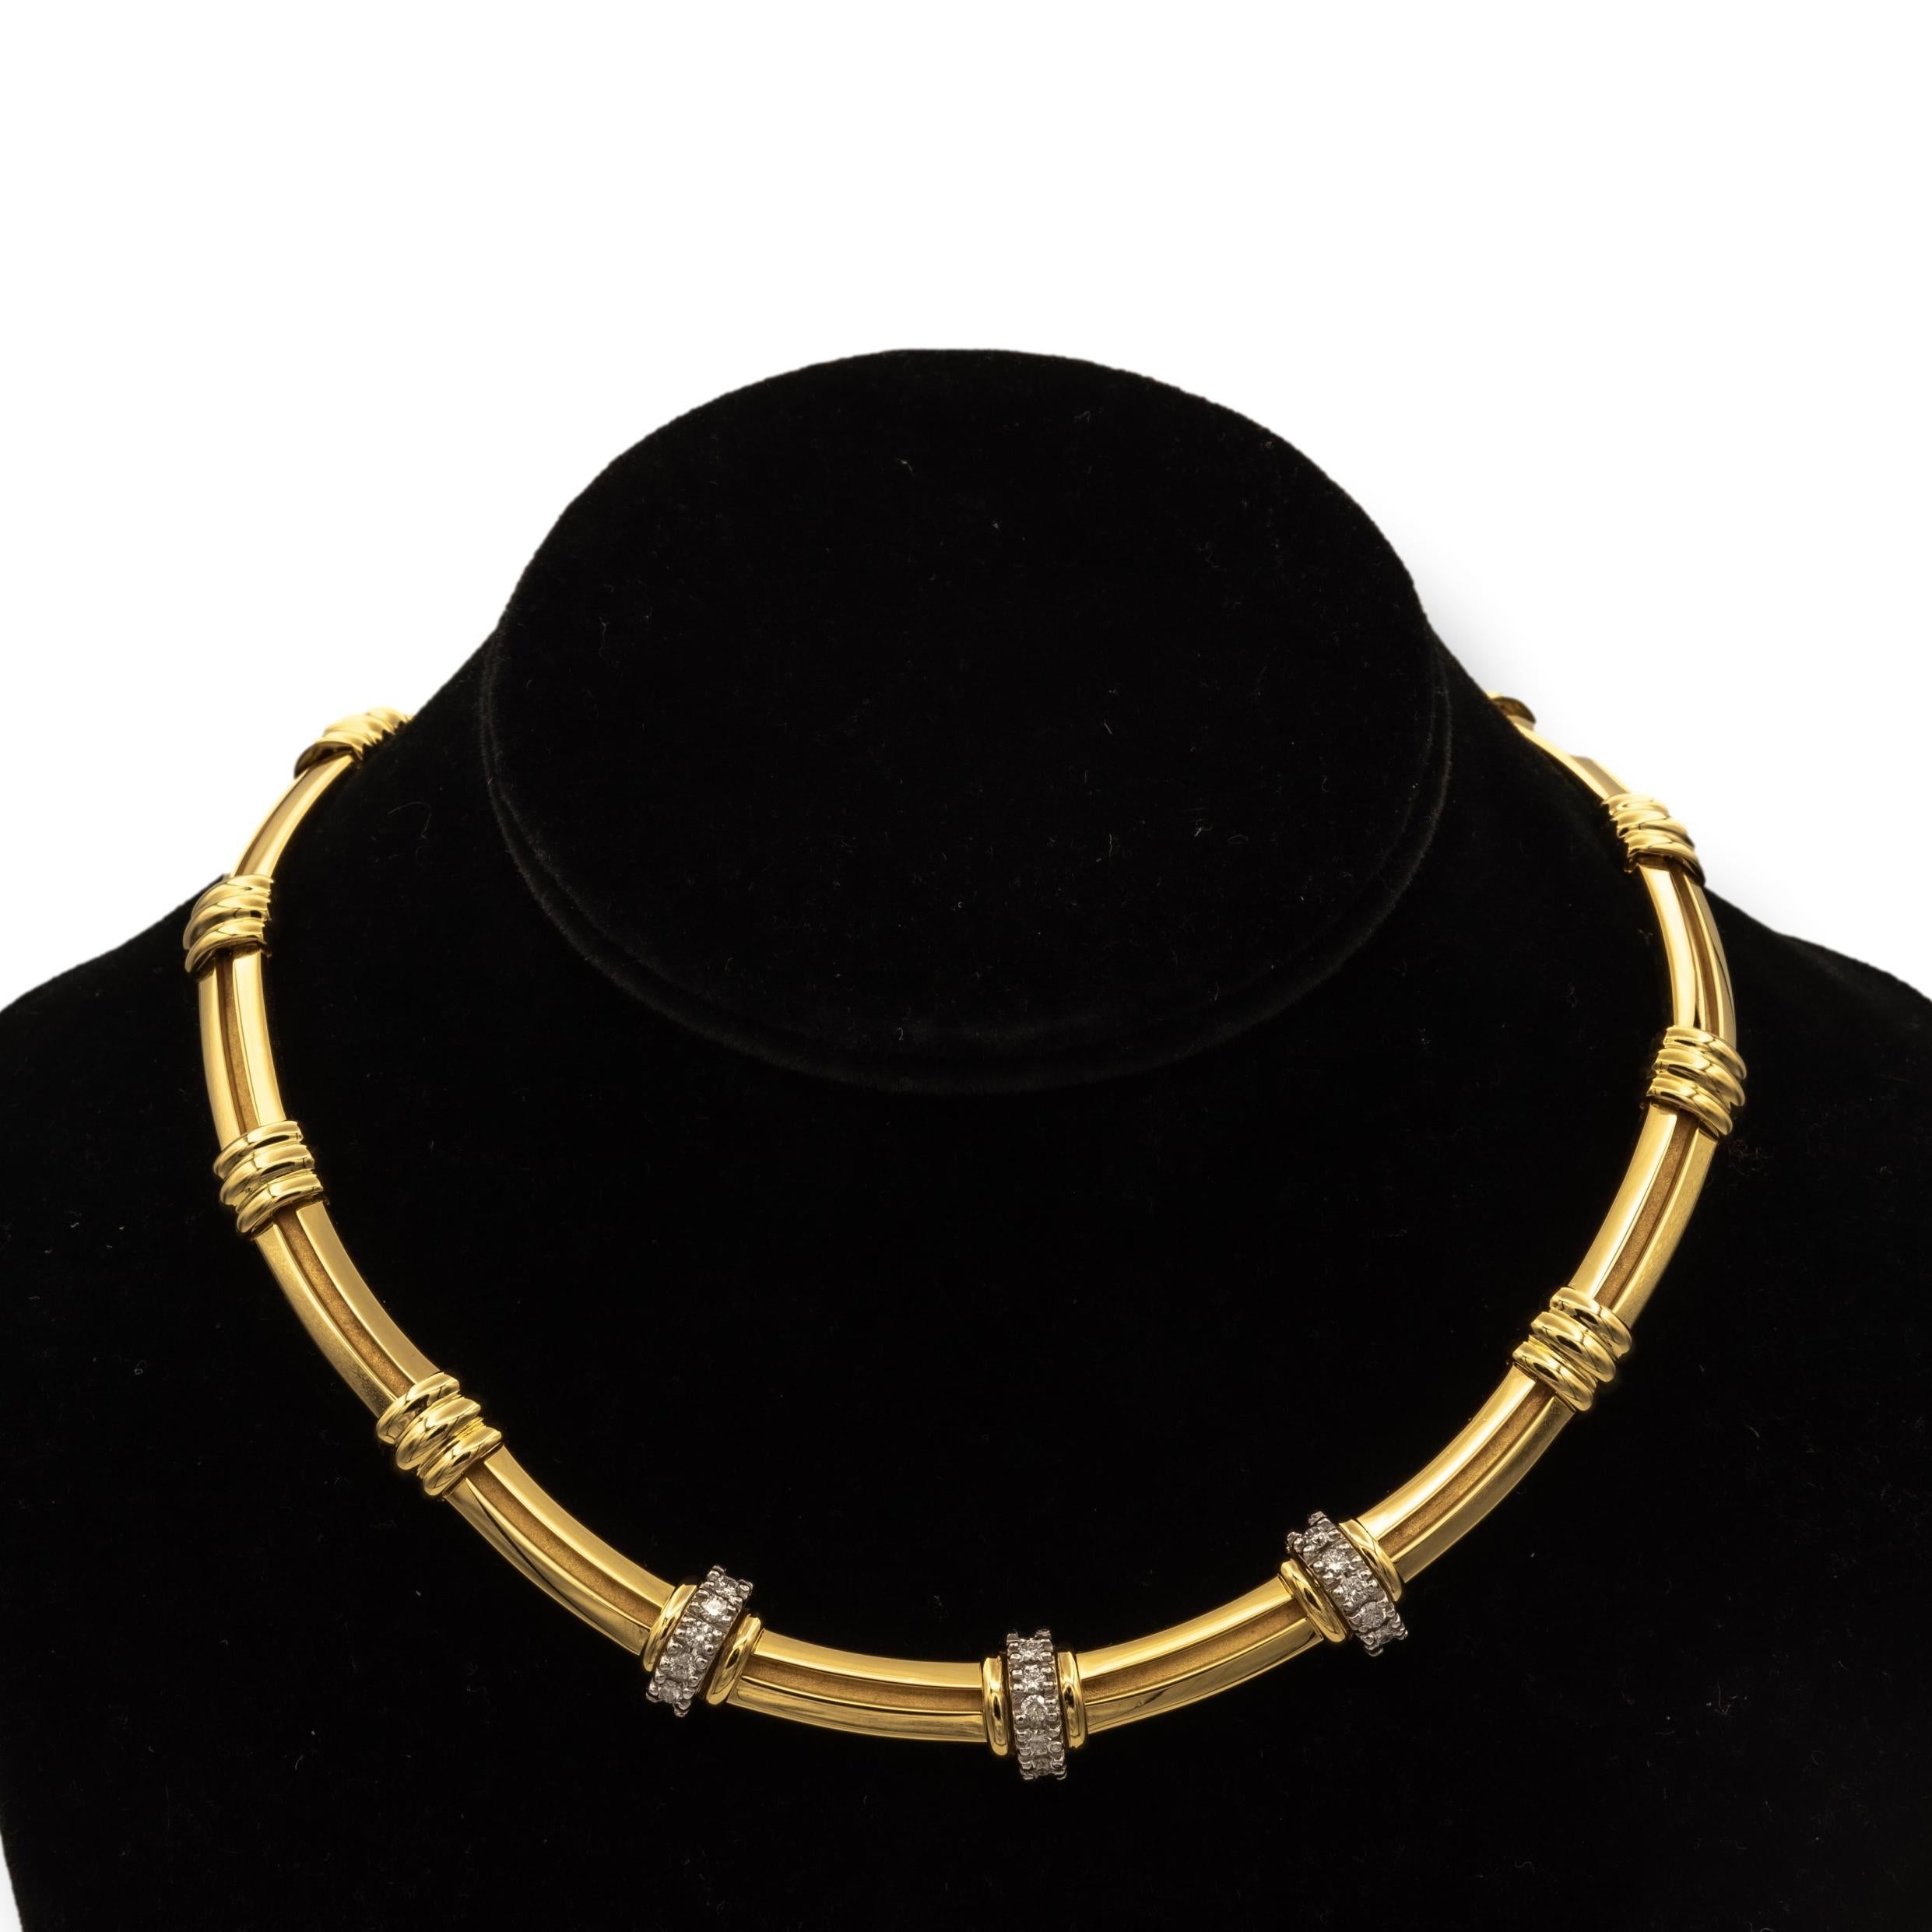 Tiffany & Co. Vintage Atlas choker necklace finely crafted in 18 karat yellow gold with 3 diamond stations set in platinum. The diamond stations are set with 15 round brilliant cut diamonds weighing 0.75 carats total weight approximately.  E-F color